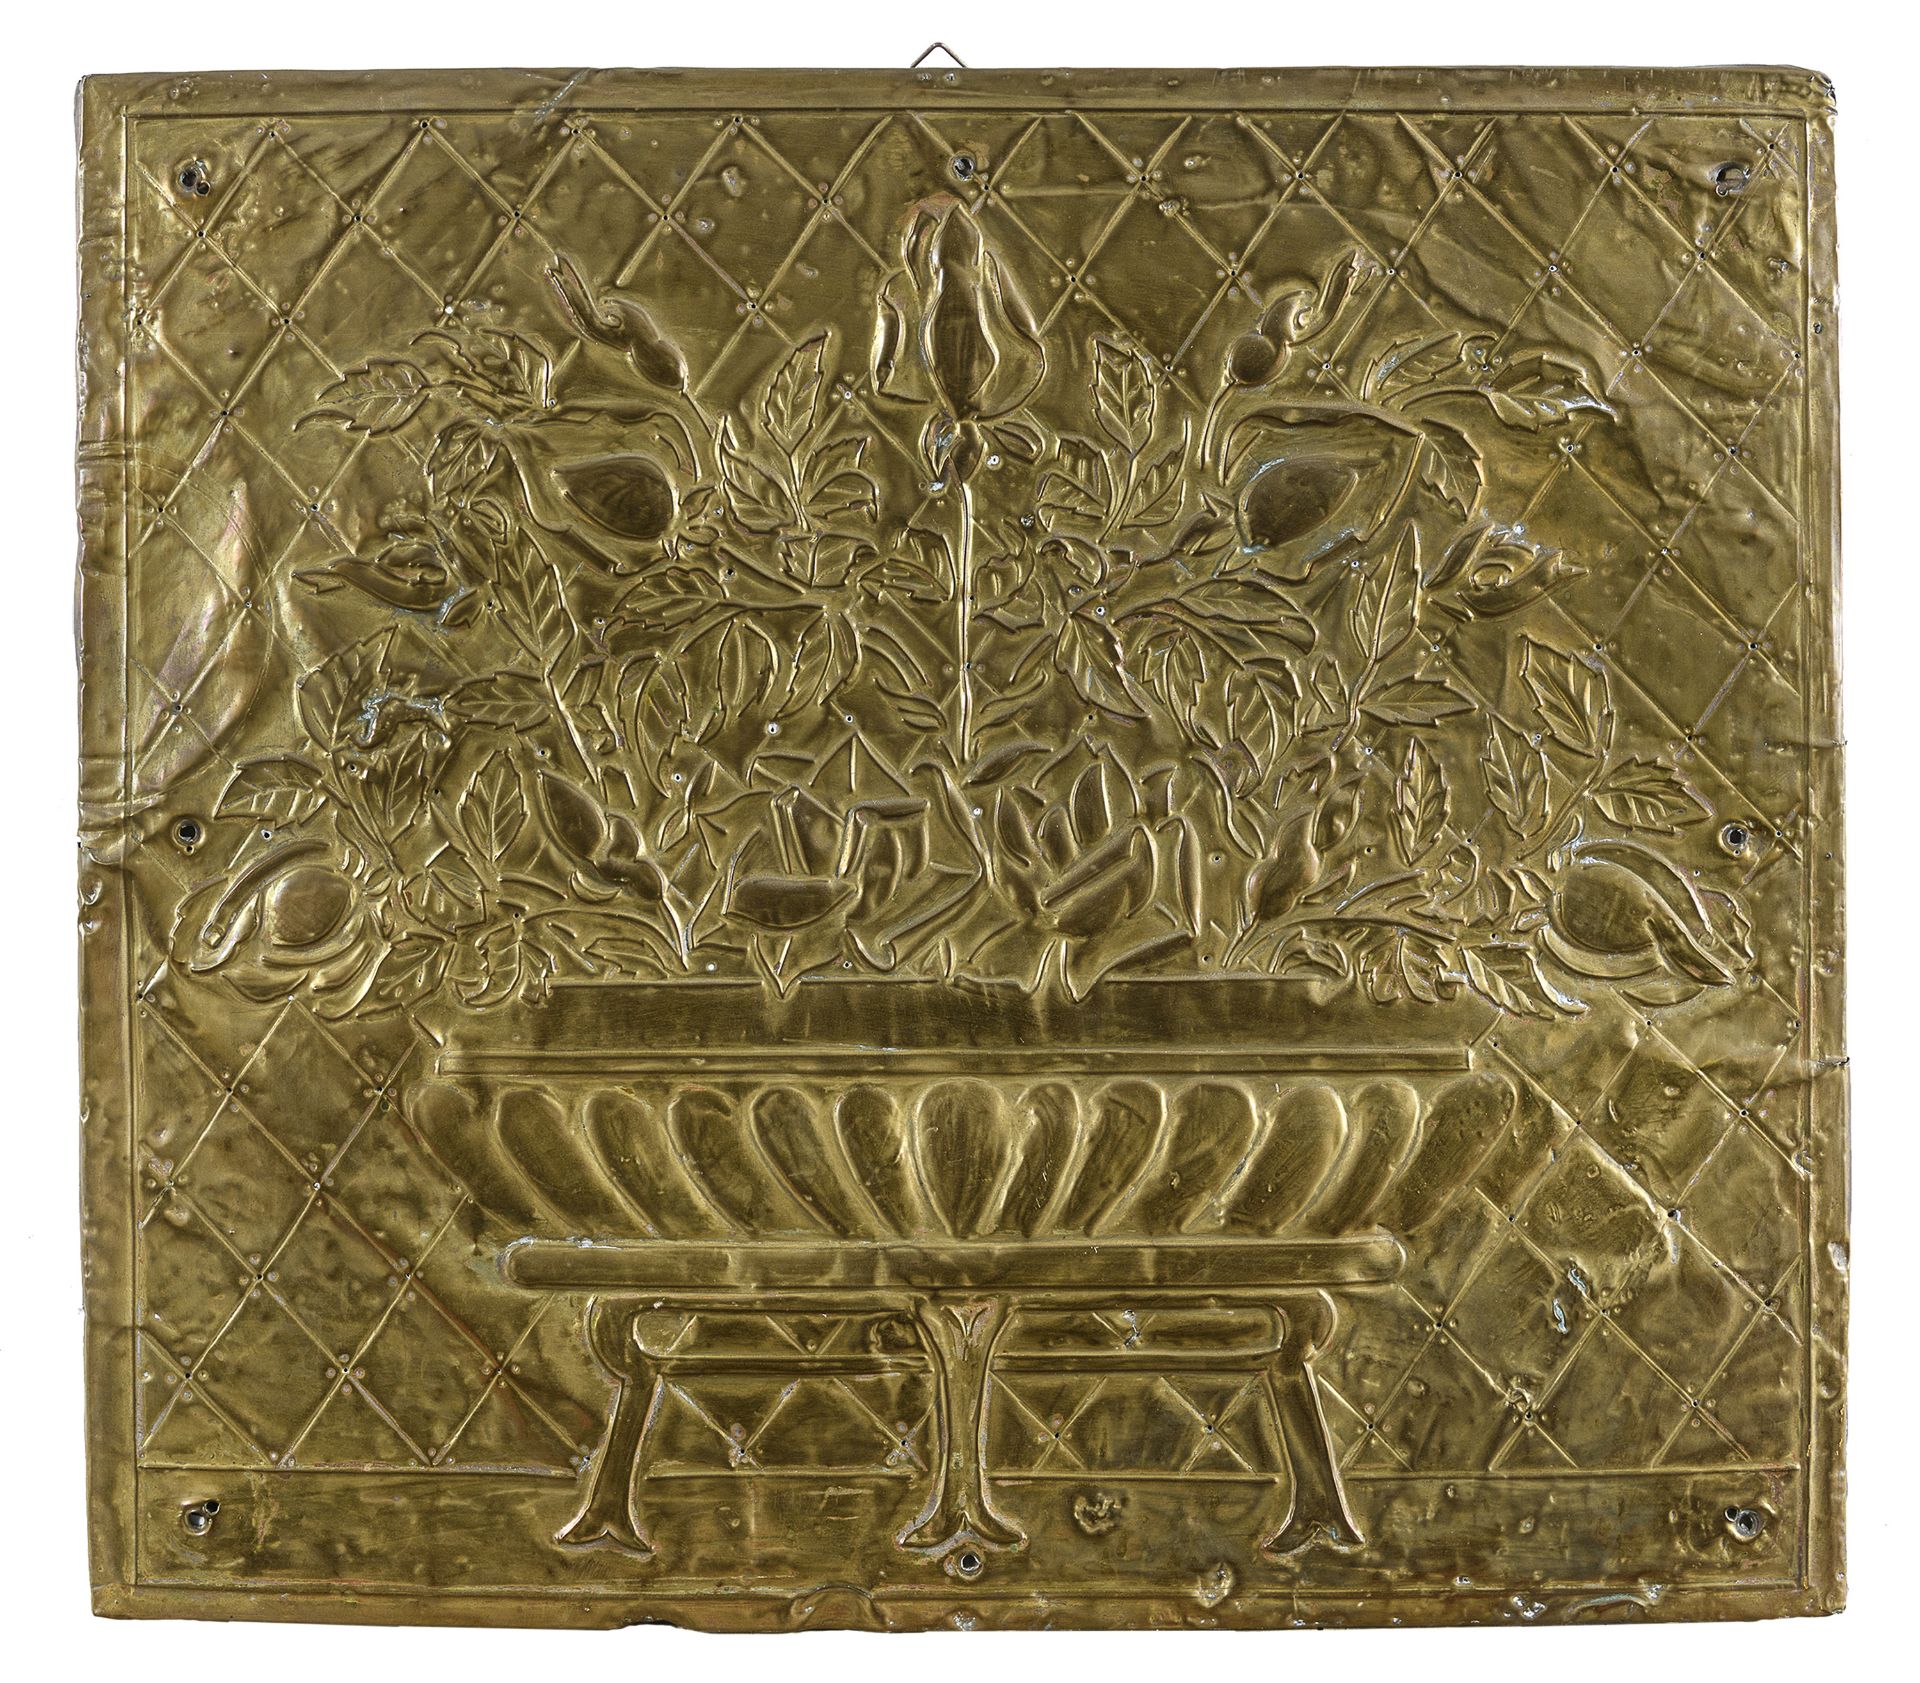 BAS-RELIEF IN GILDED COPPER 18th CENTURY